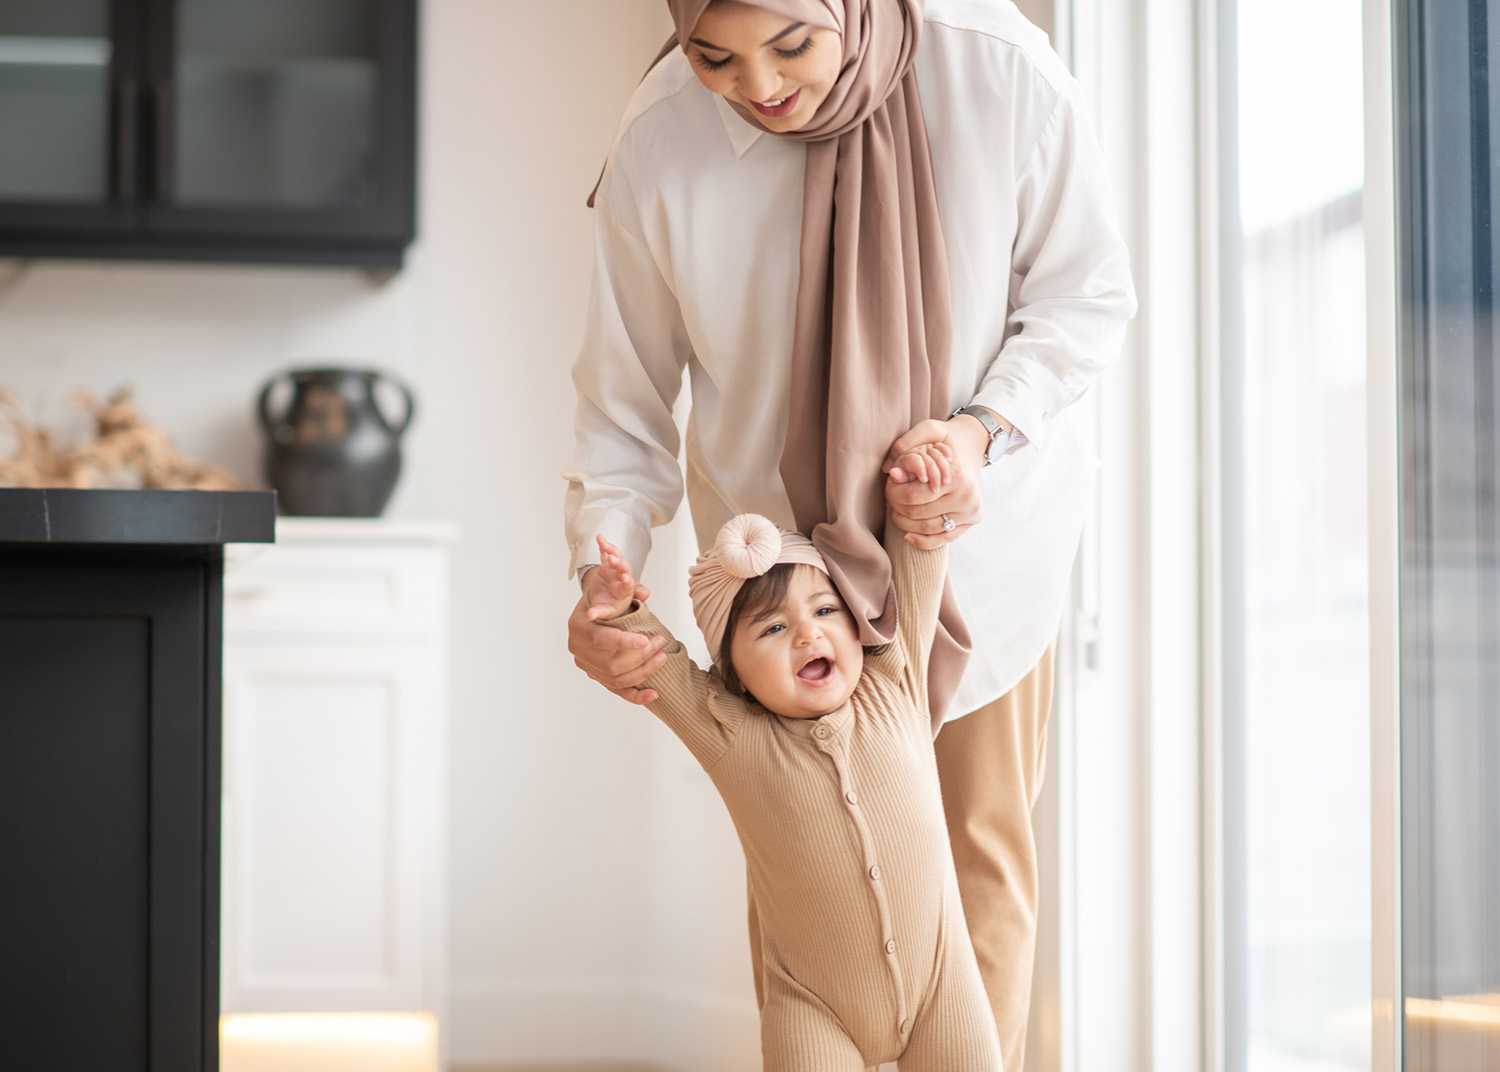 A Muslim Mother holds her daughters arms as she teaches her how to walk.  They two are dressed in muted neutral tones and traditional headdress as they walk around their living room.  The baby girl has a huge smile on her face as she walks with her Mother.